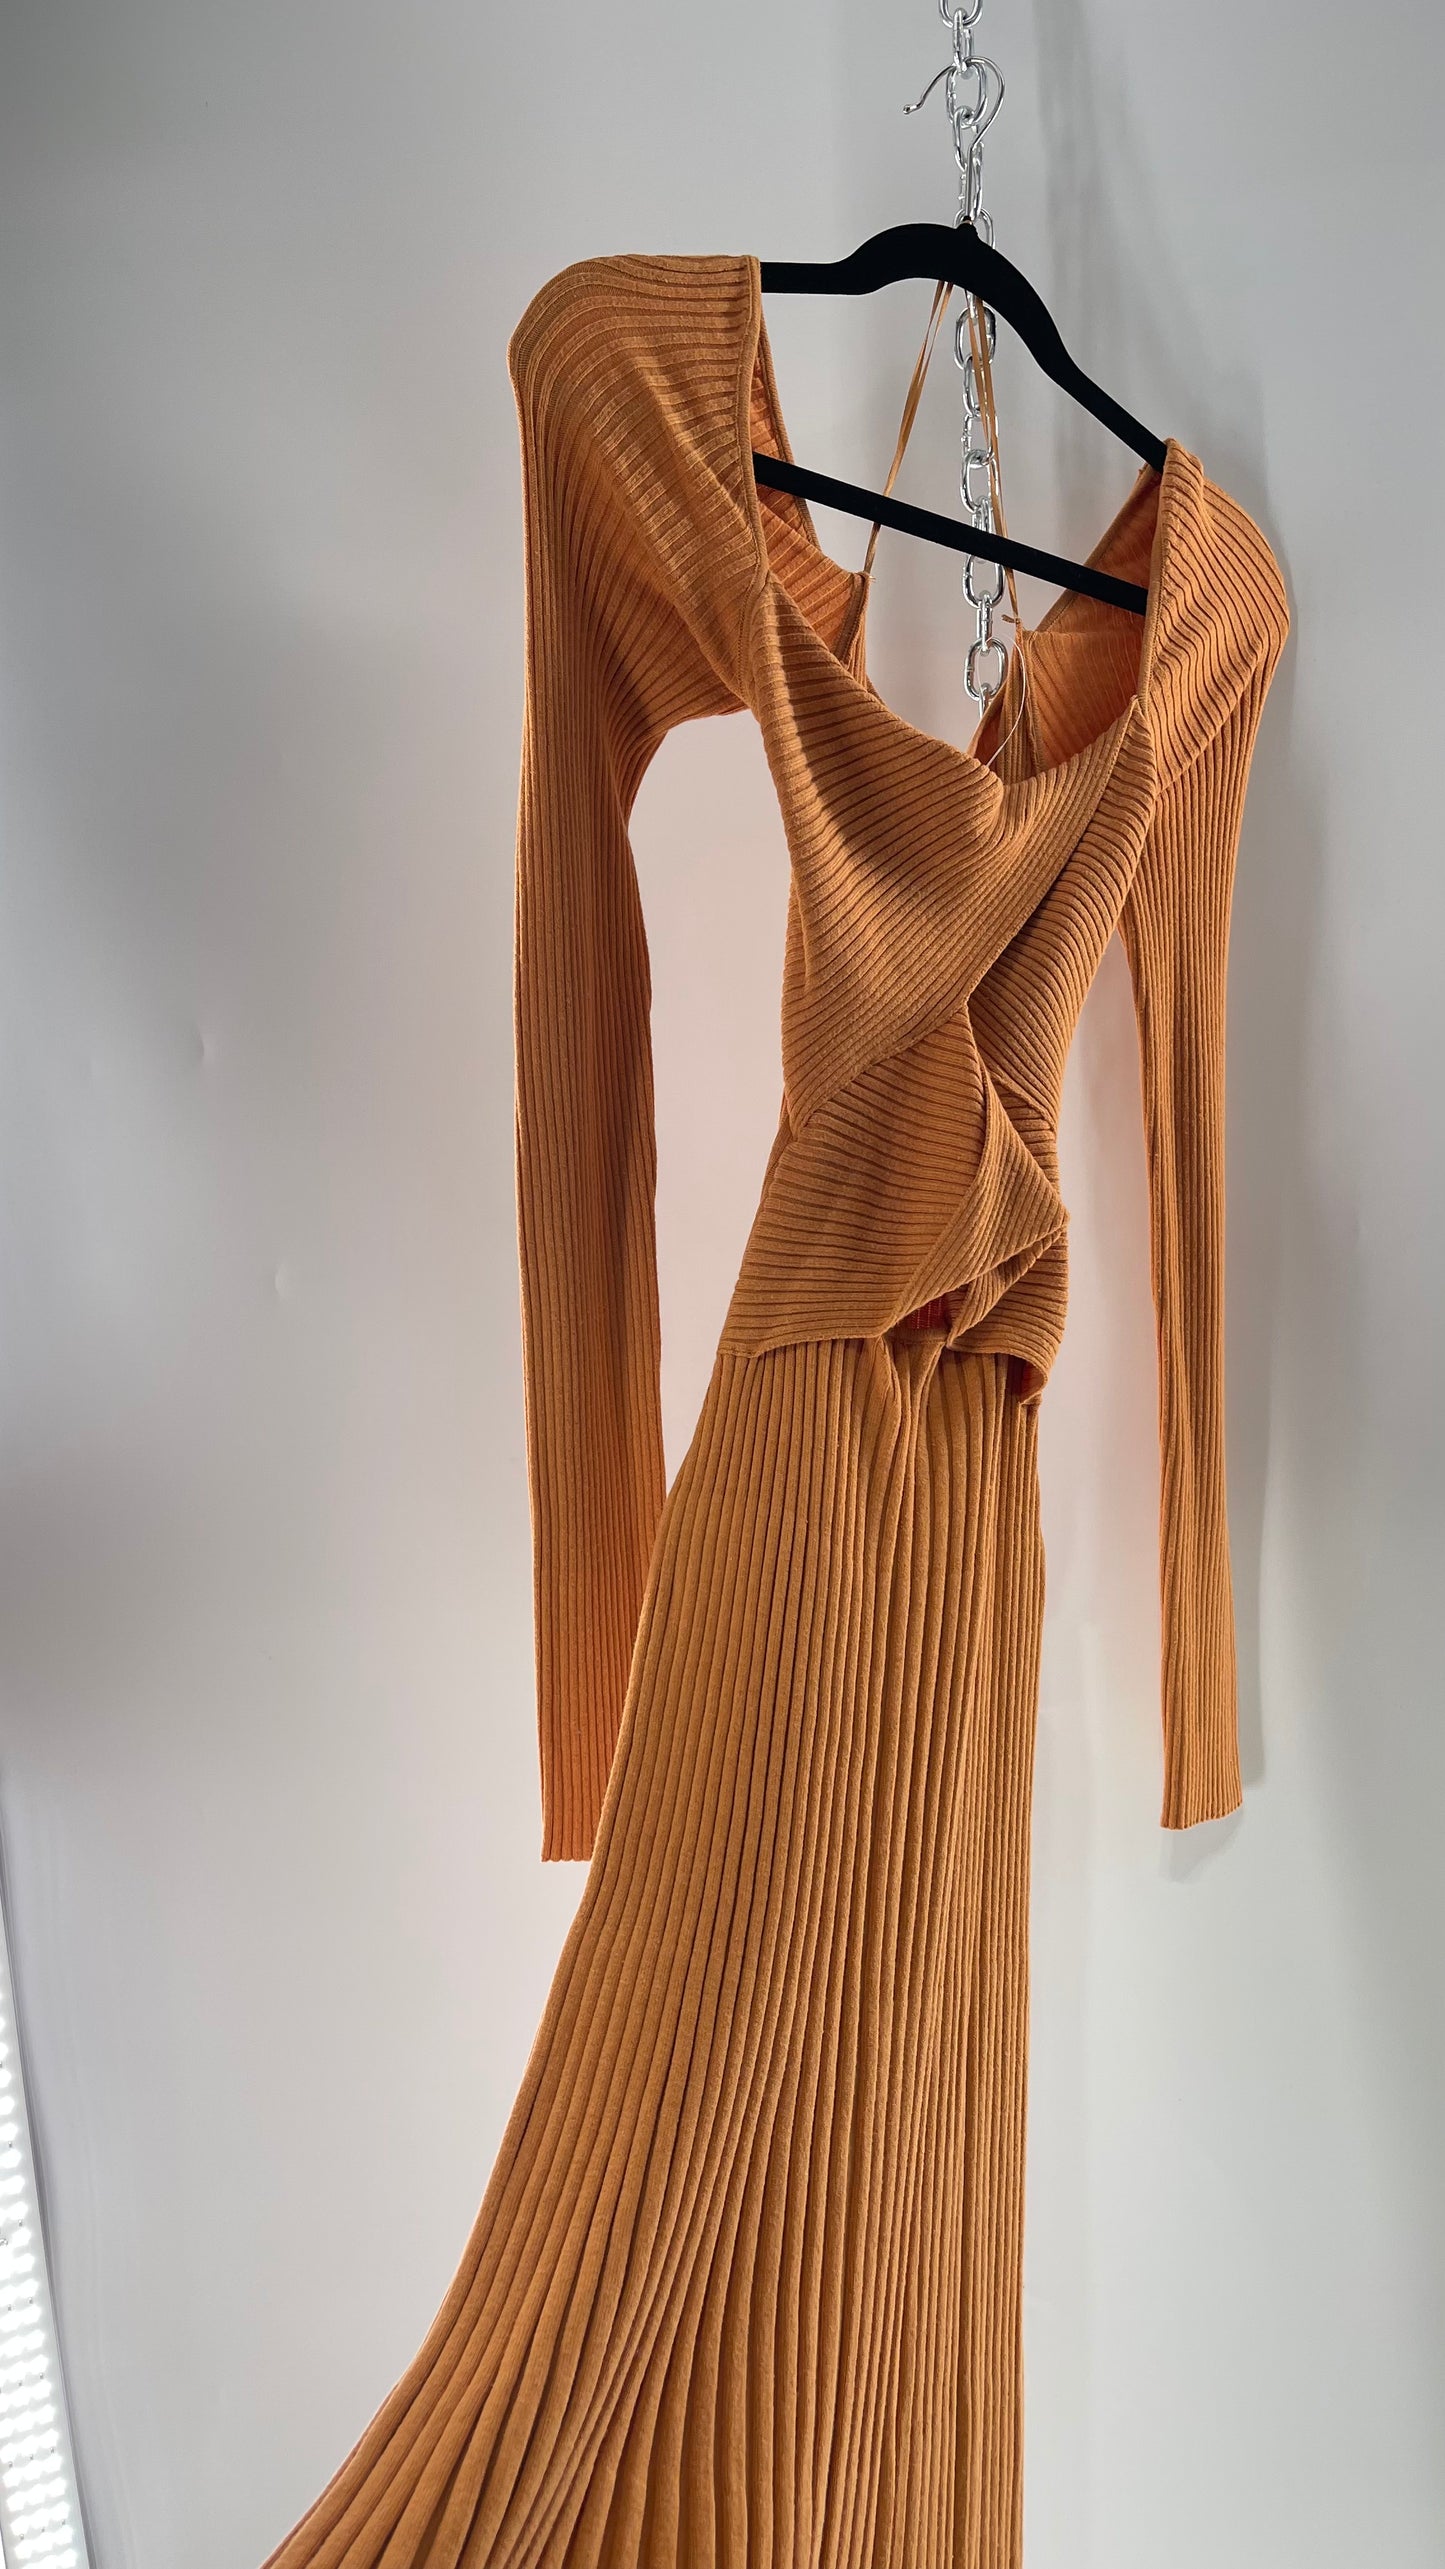 Free People Orange Knit Maxi Dress with Bandage Bust and Exposed Cut Out Midriff (Medium)